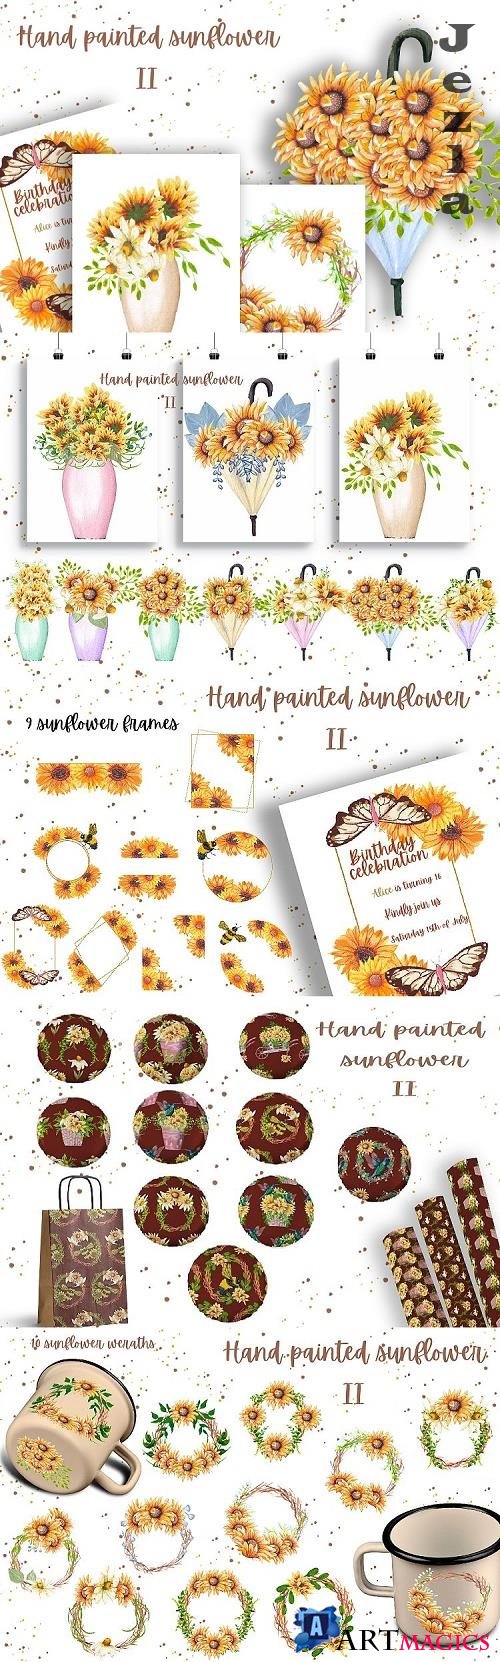 Hand painted sunflower collection II - 537775